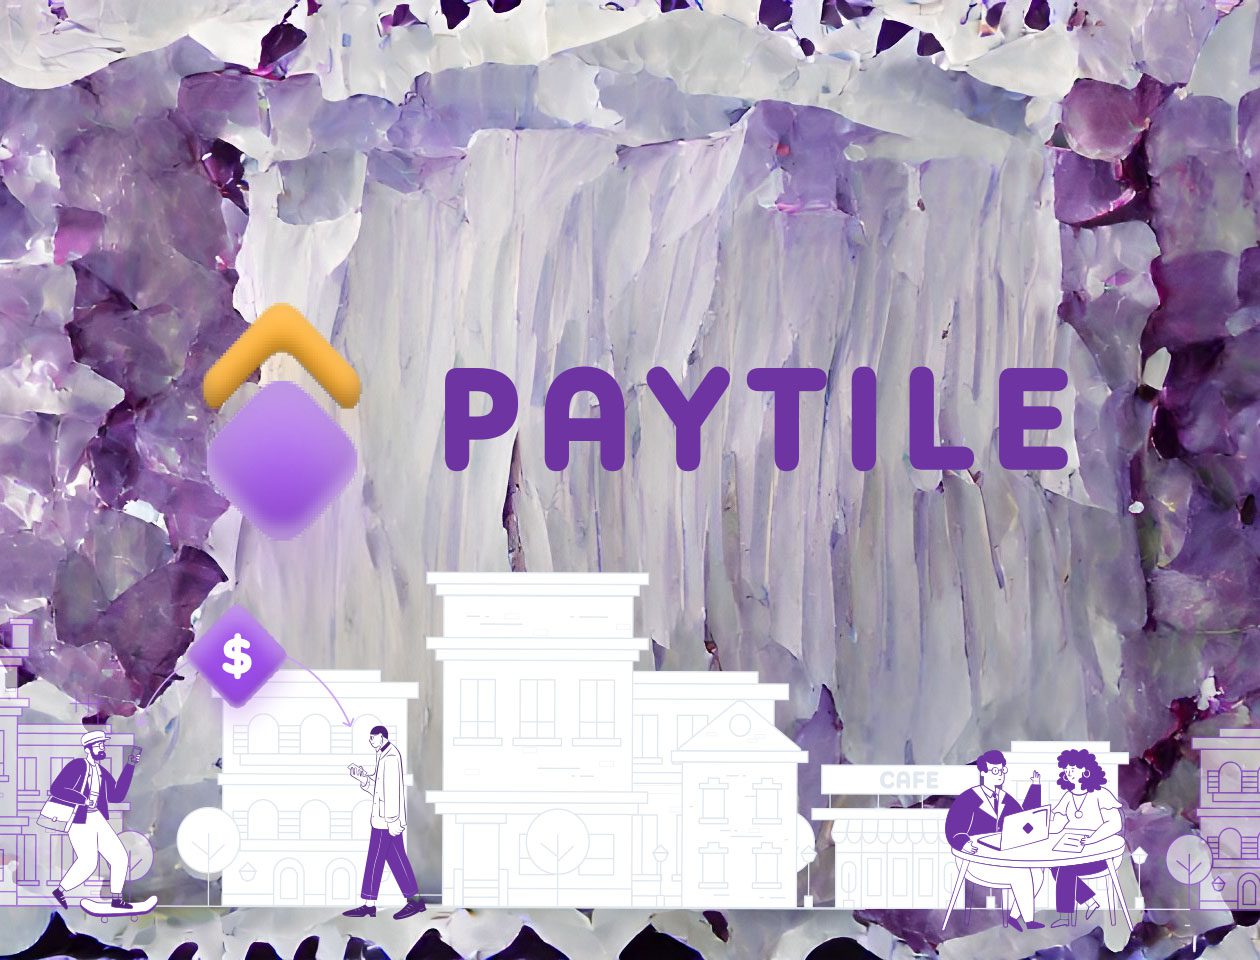 Paytile airdrop for cash3433